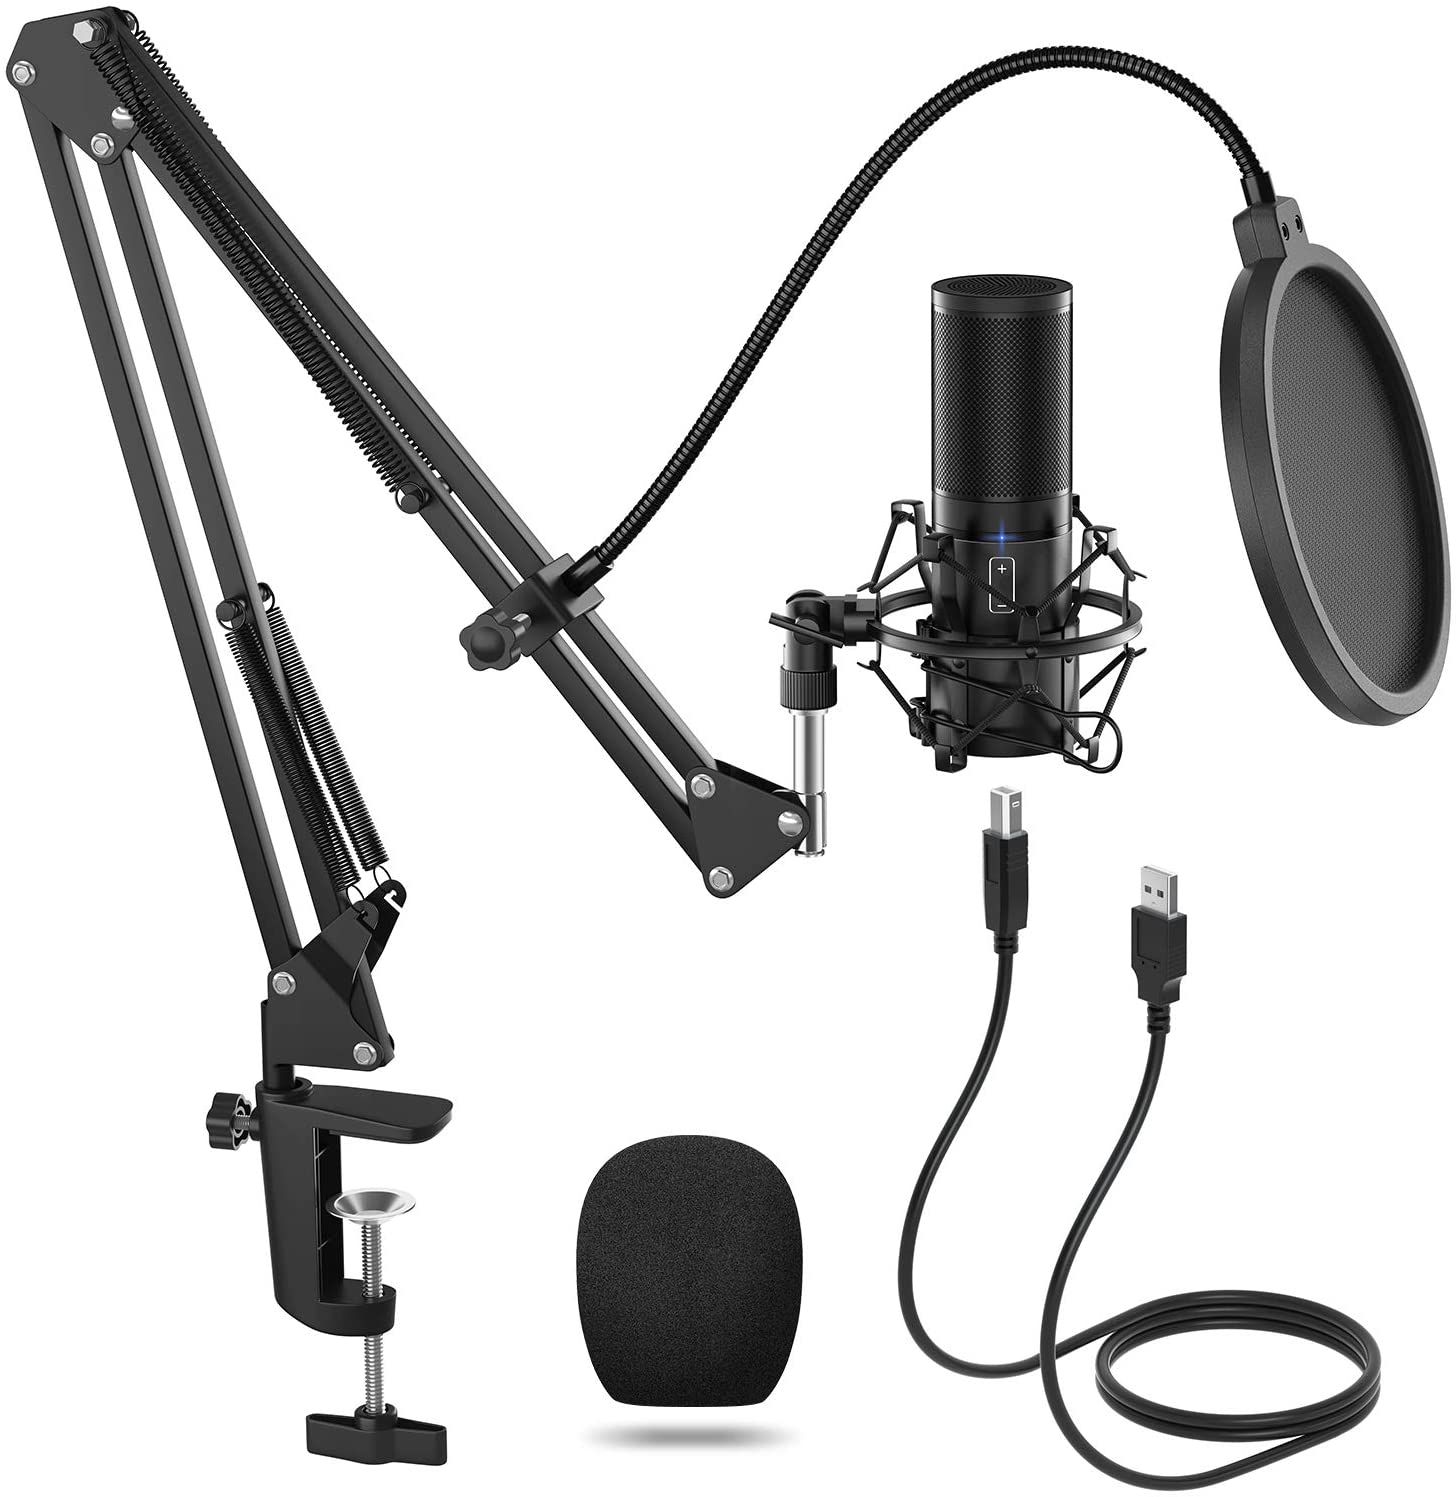 A complete view of the USB Mic Tonor Kit